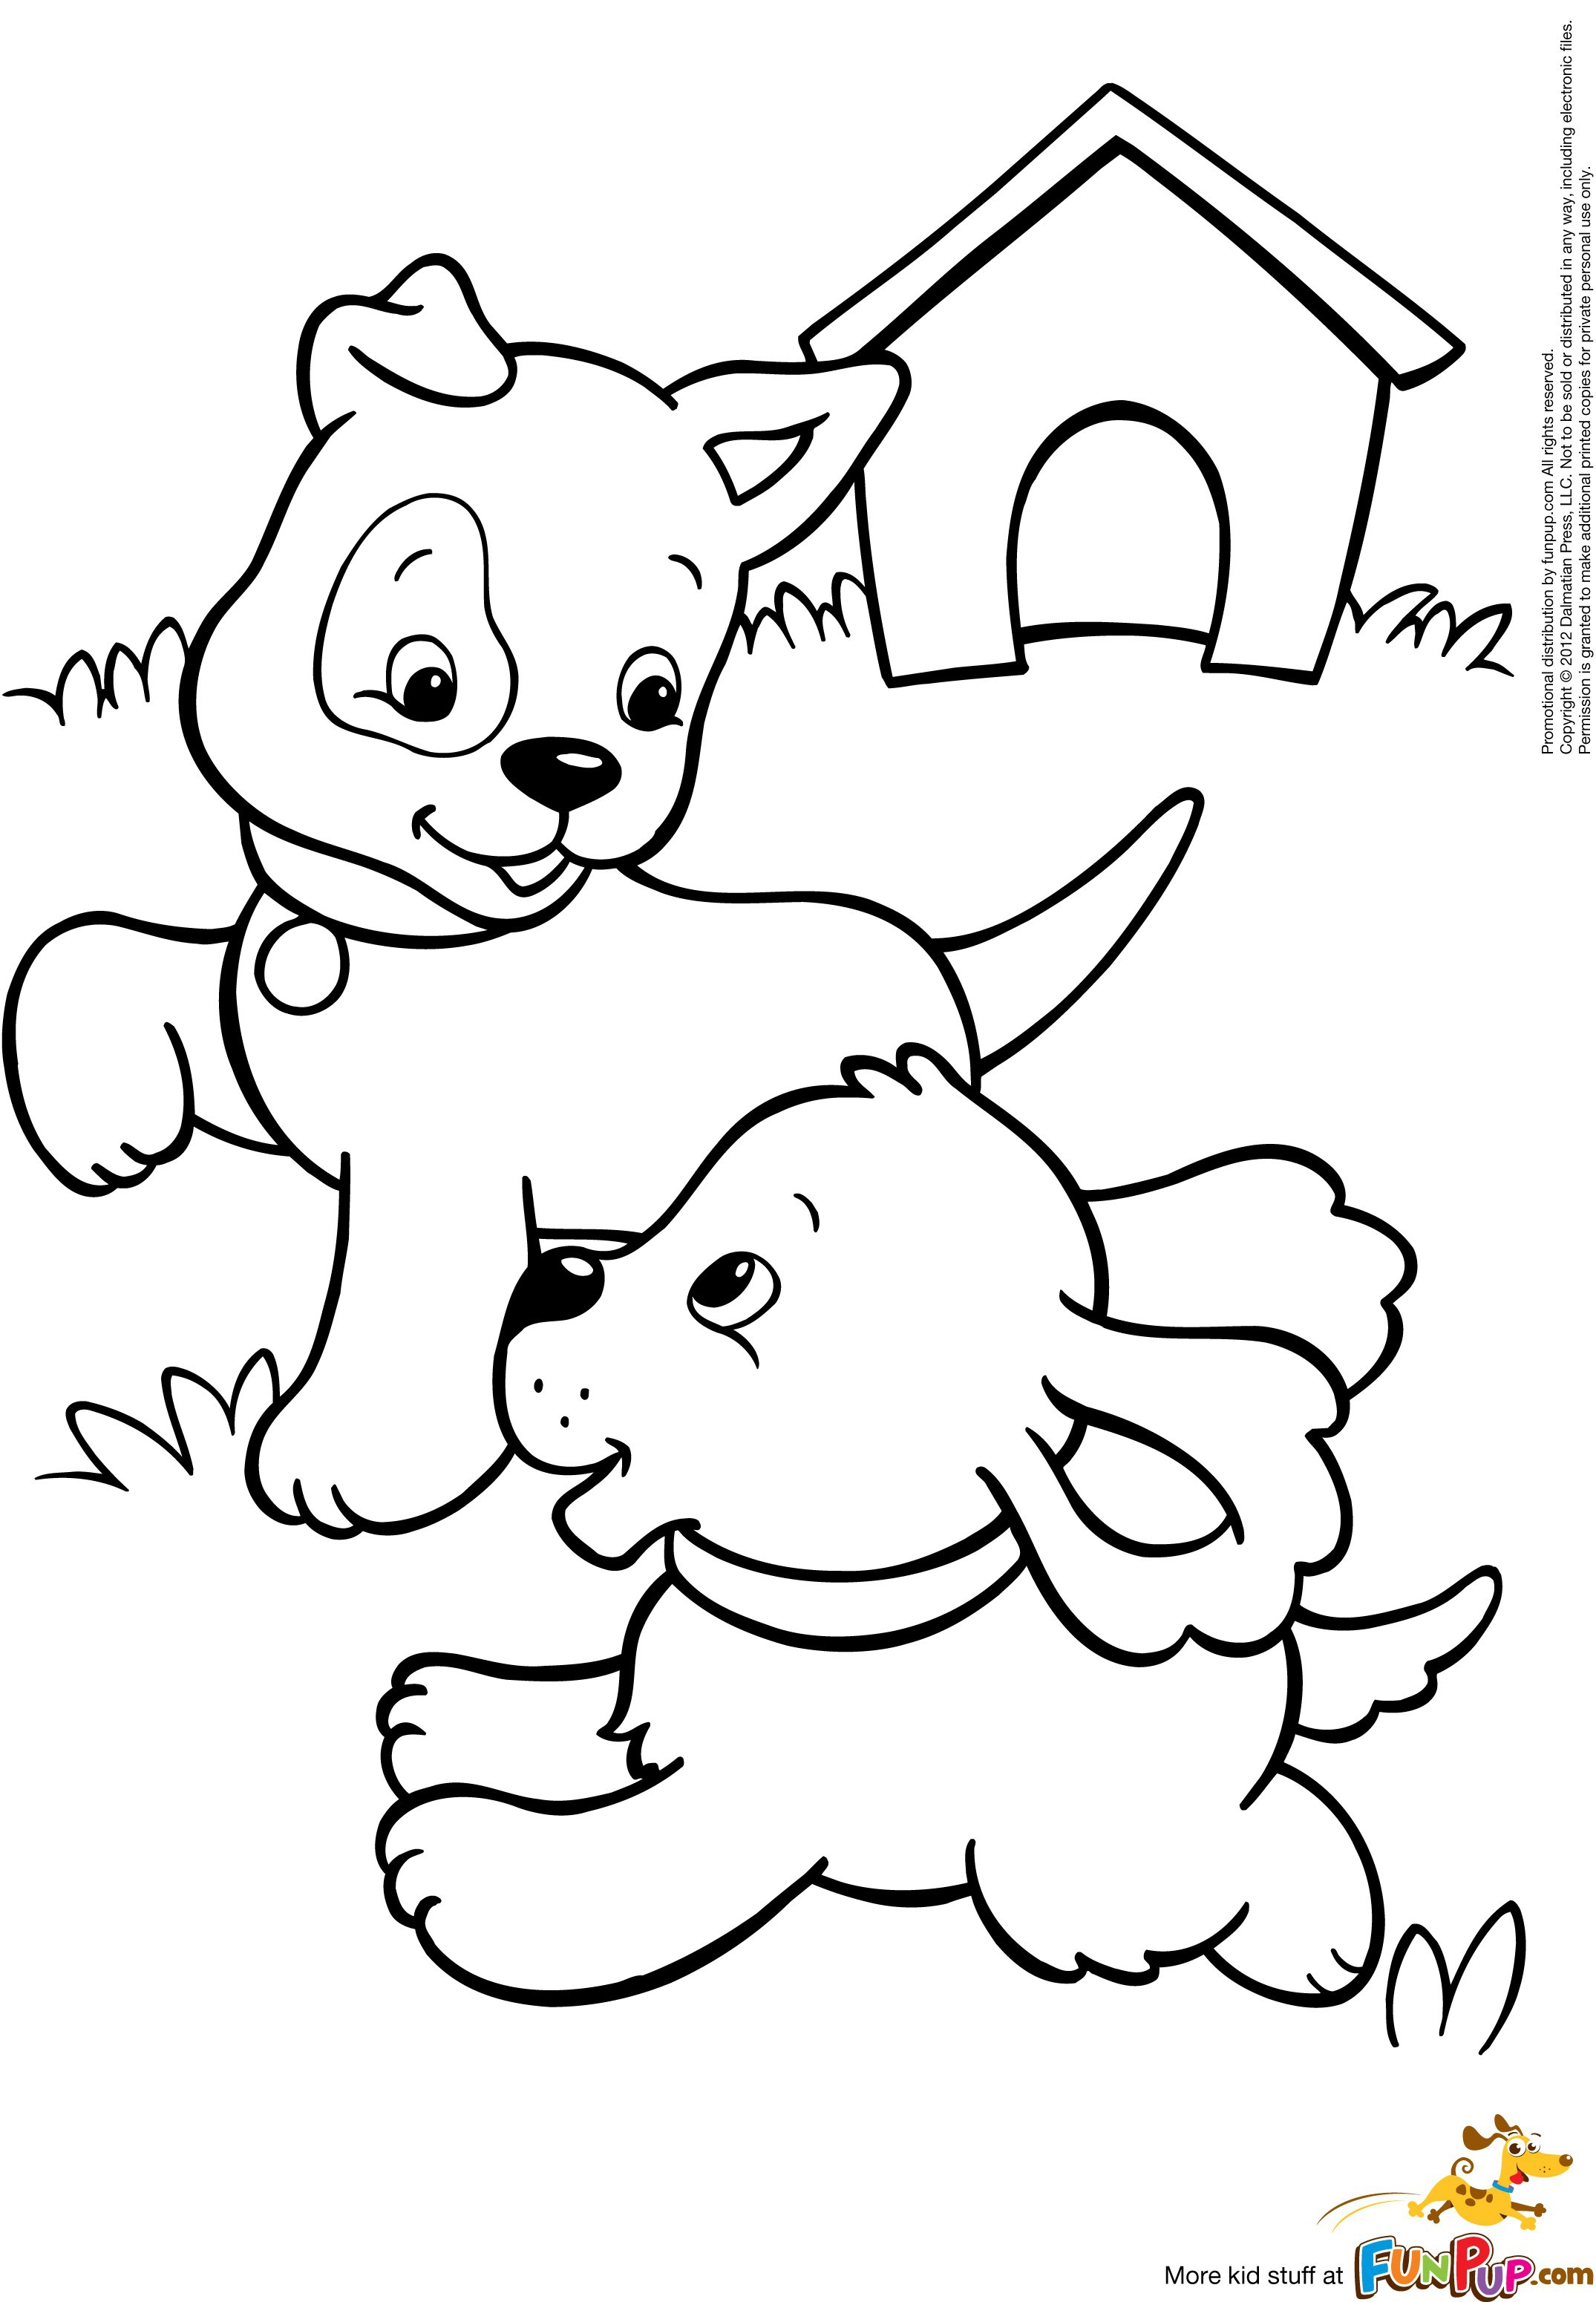 Coloring Pages Of Cute Dogs and Puppies